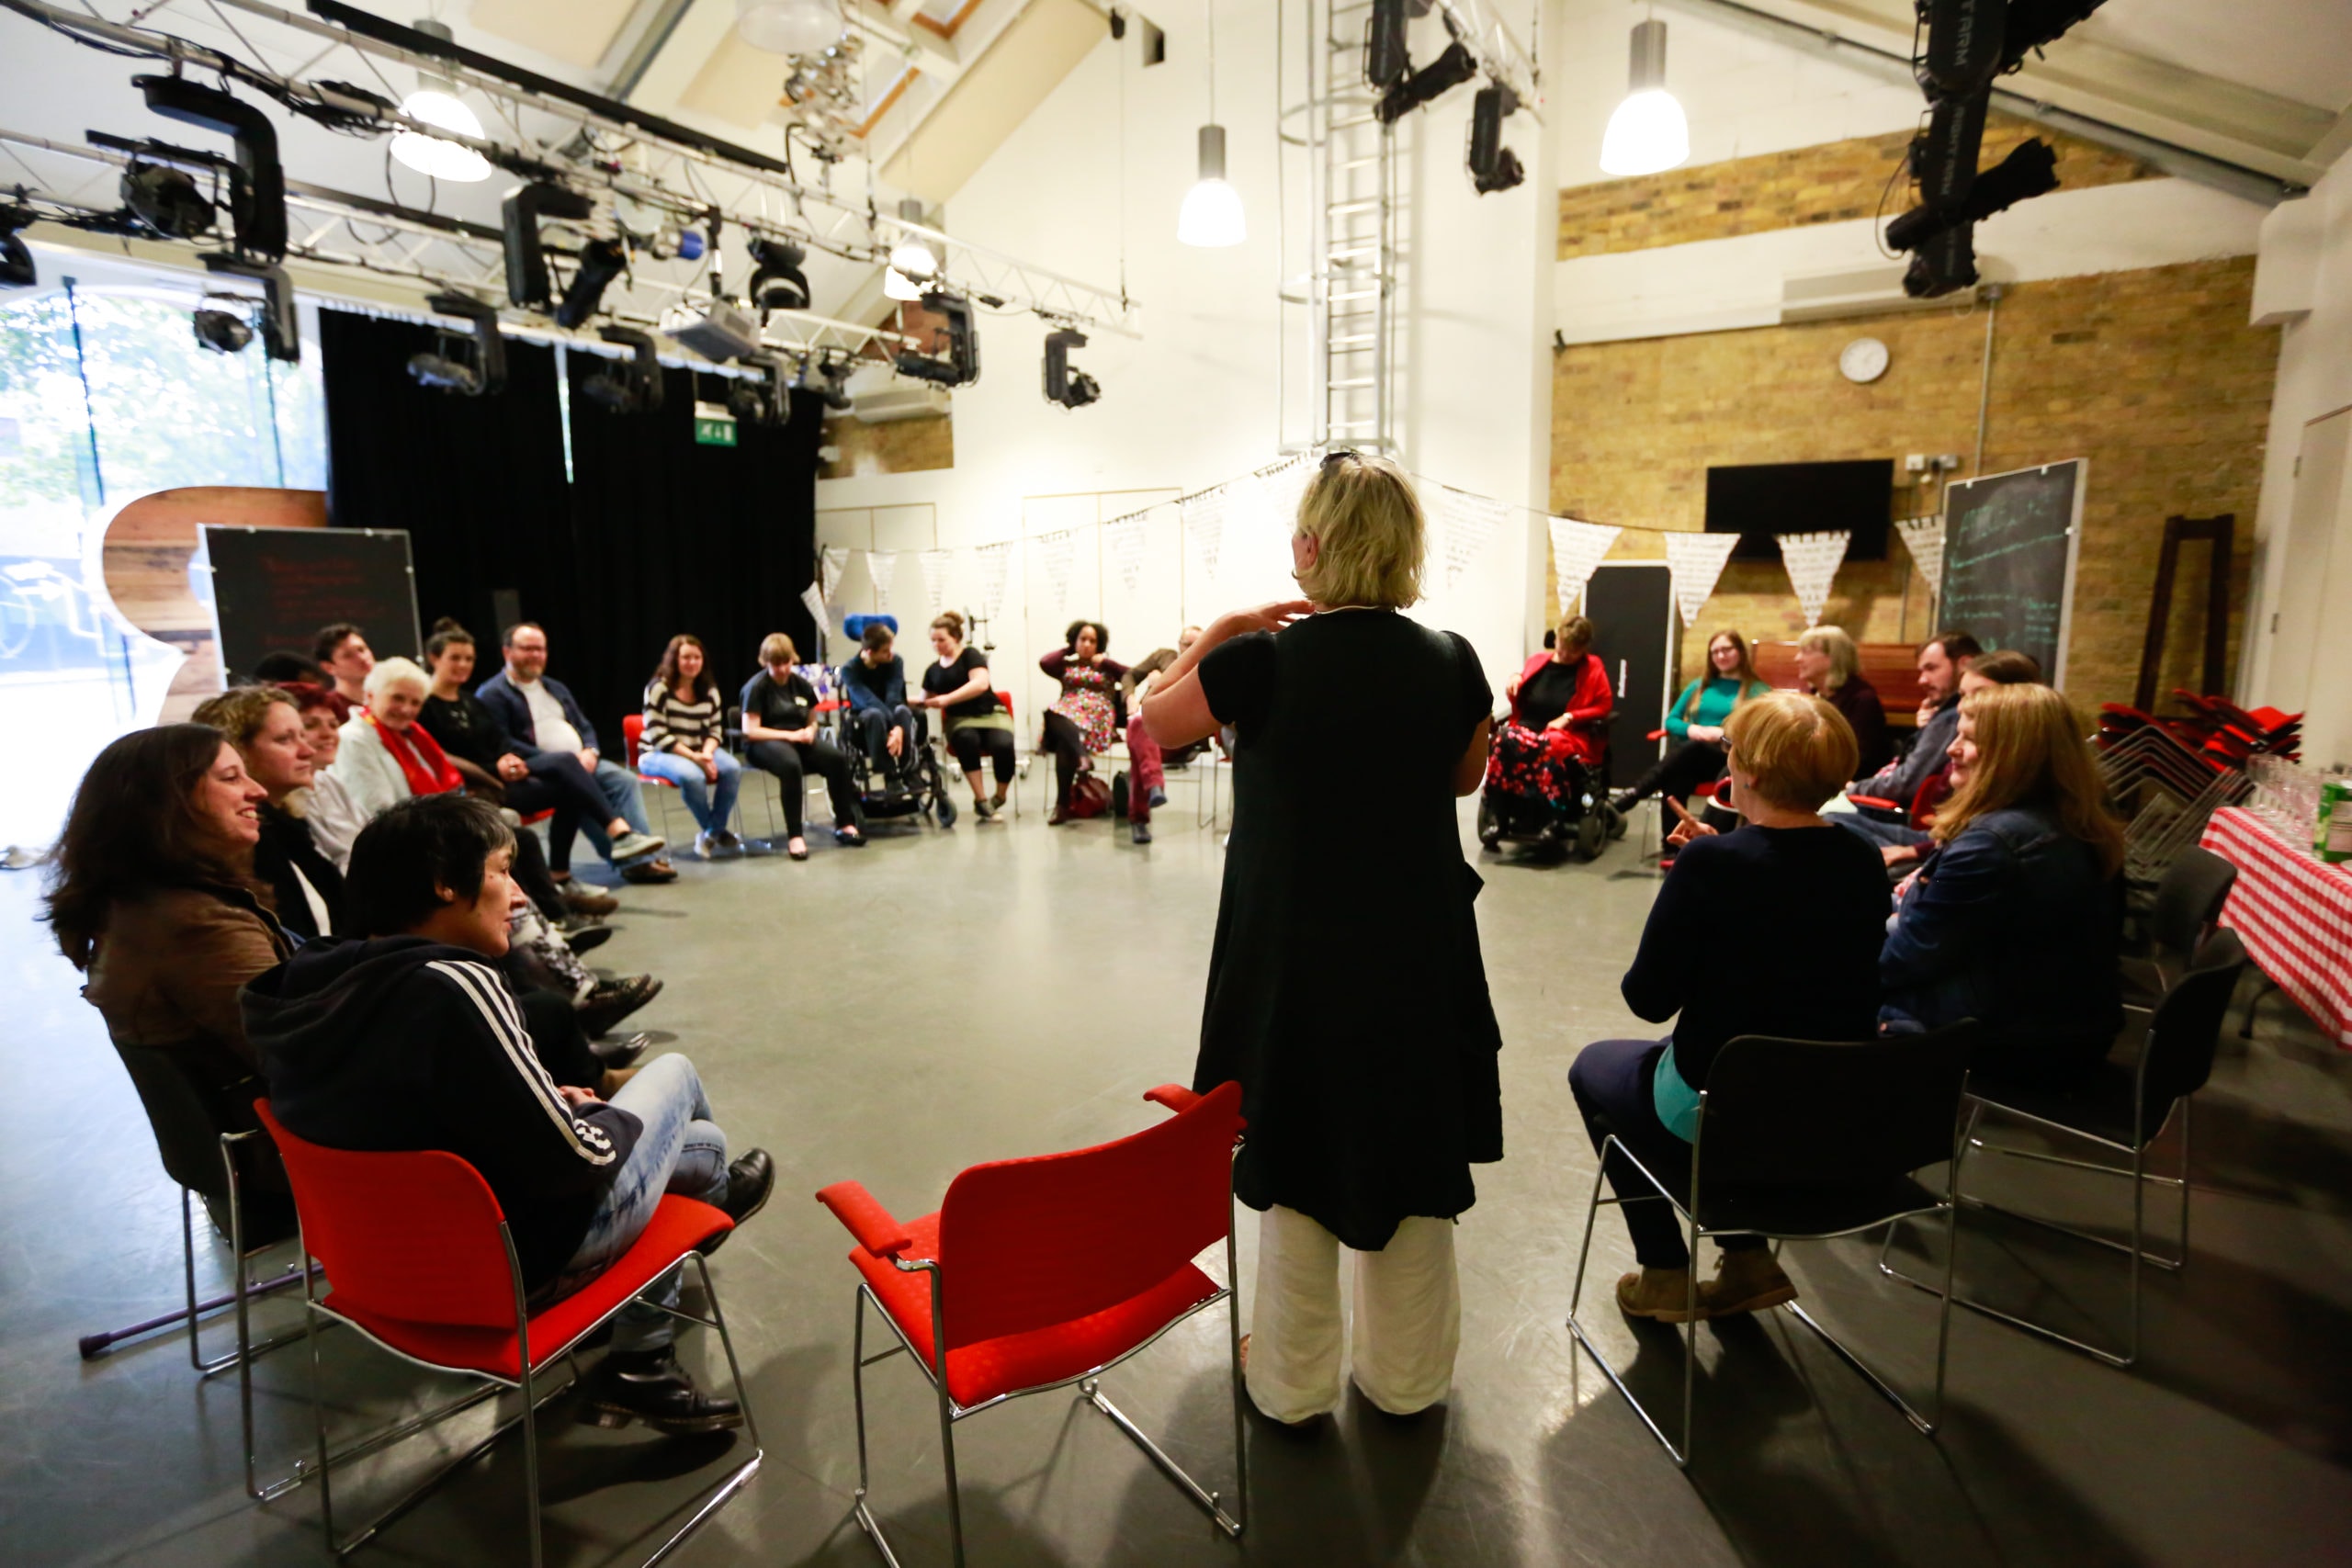 A group of people in a circle of chairs in Graeae's rehearsal room